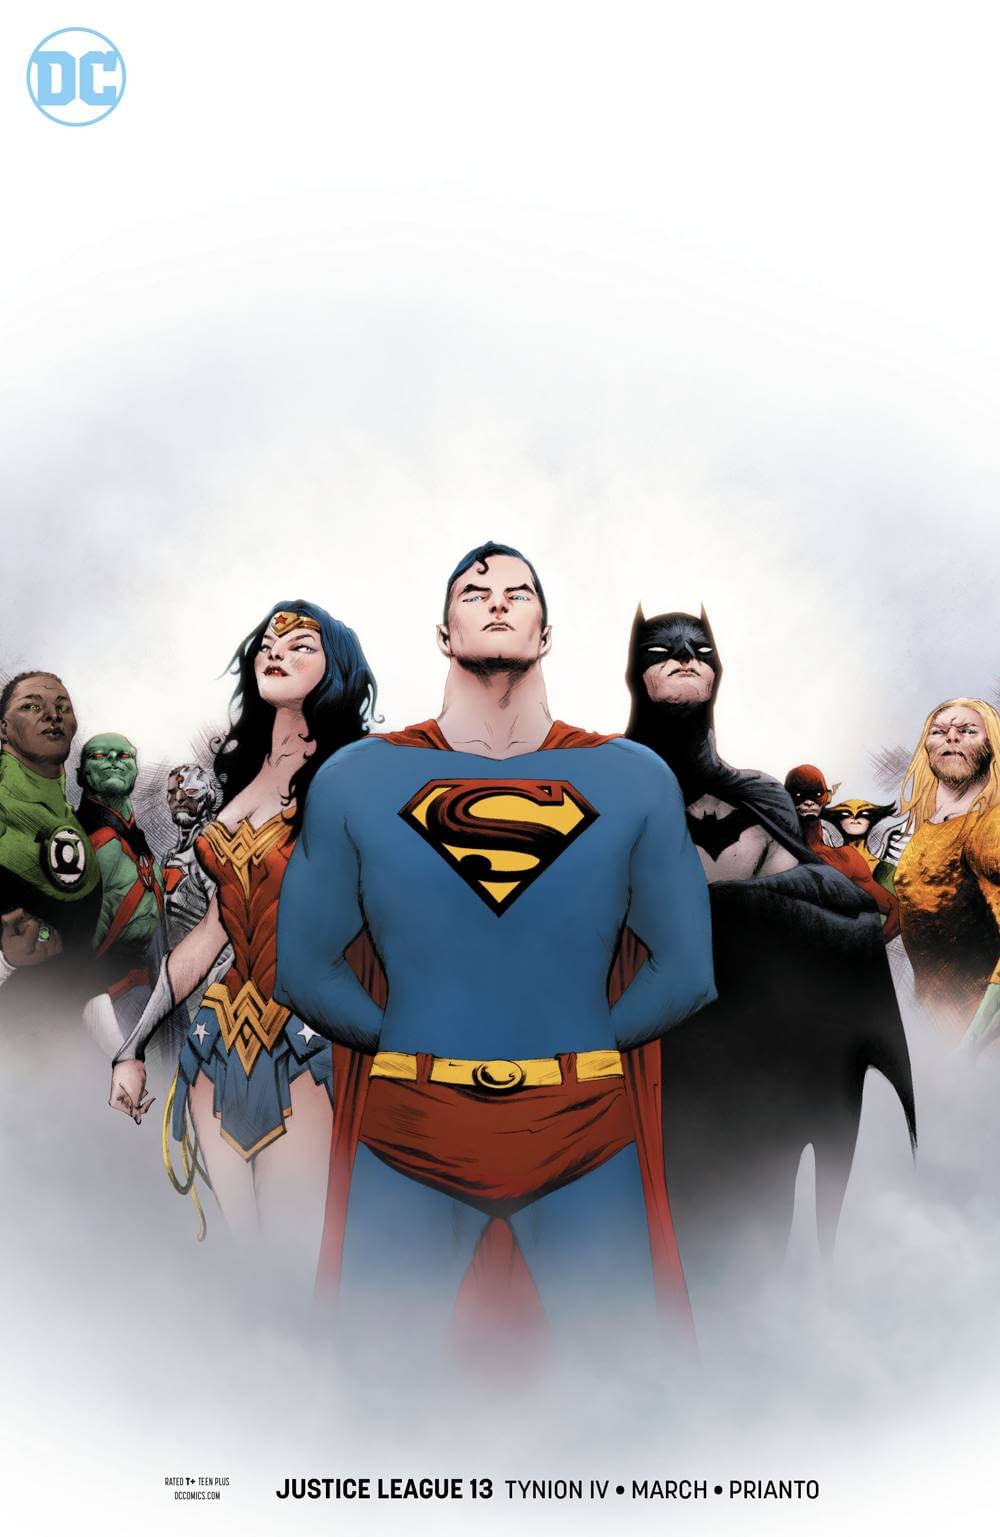 DC Comics Swaps Out Jae Lee for Stjepan Sejic on Justice League #14 Variant